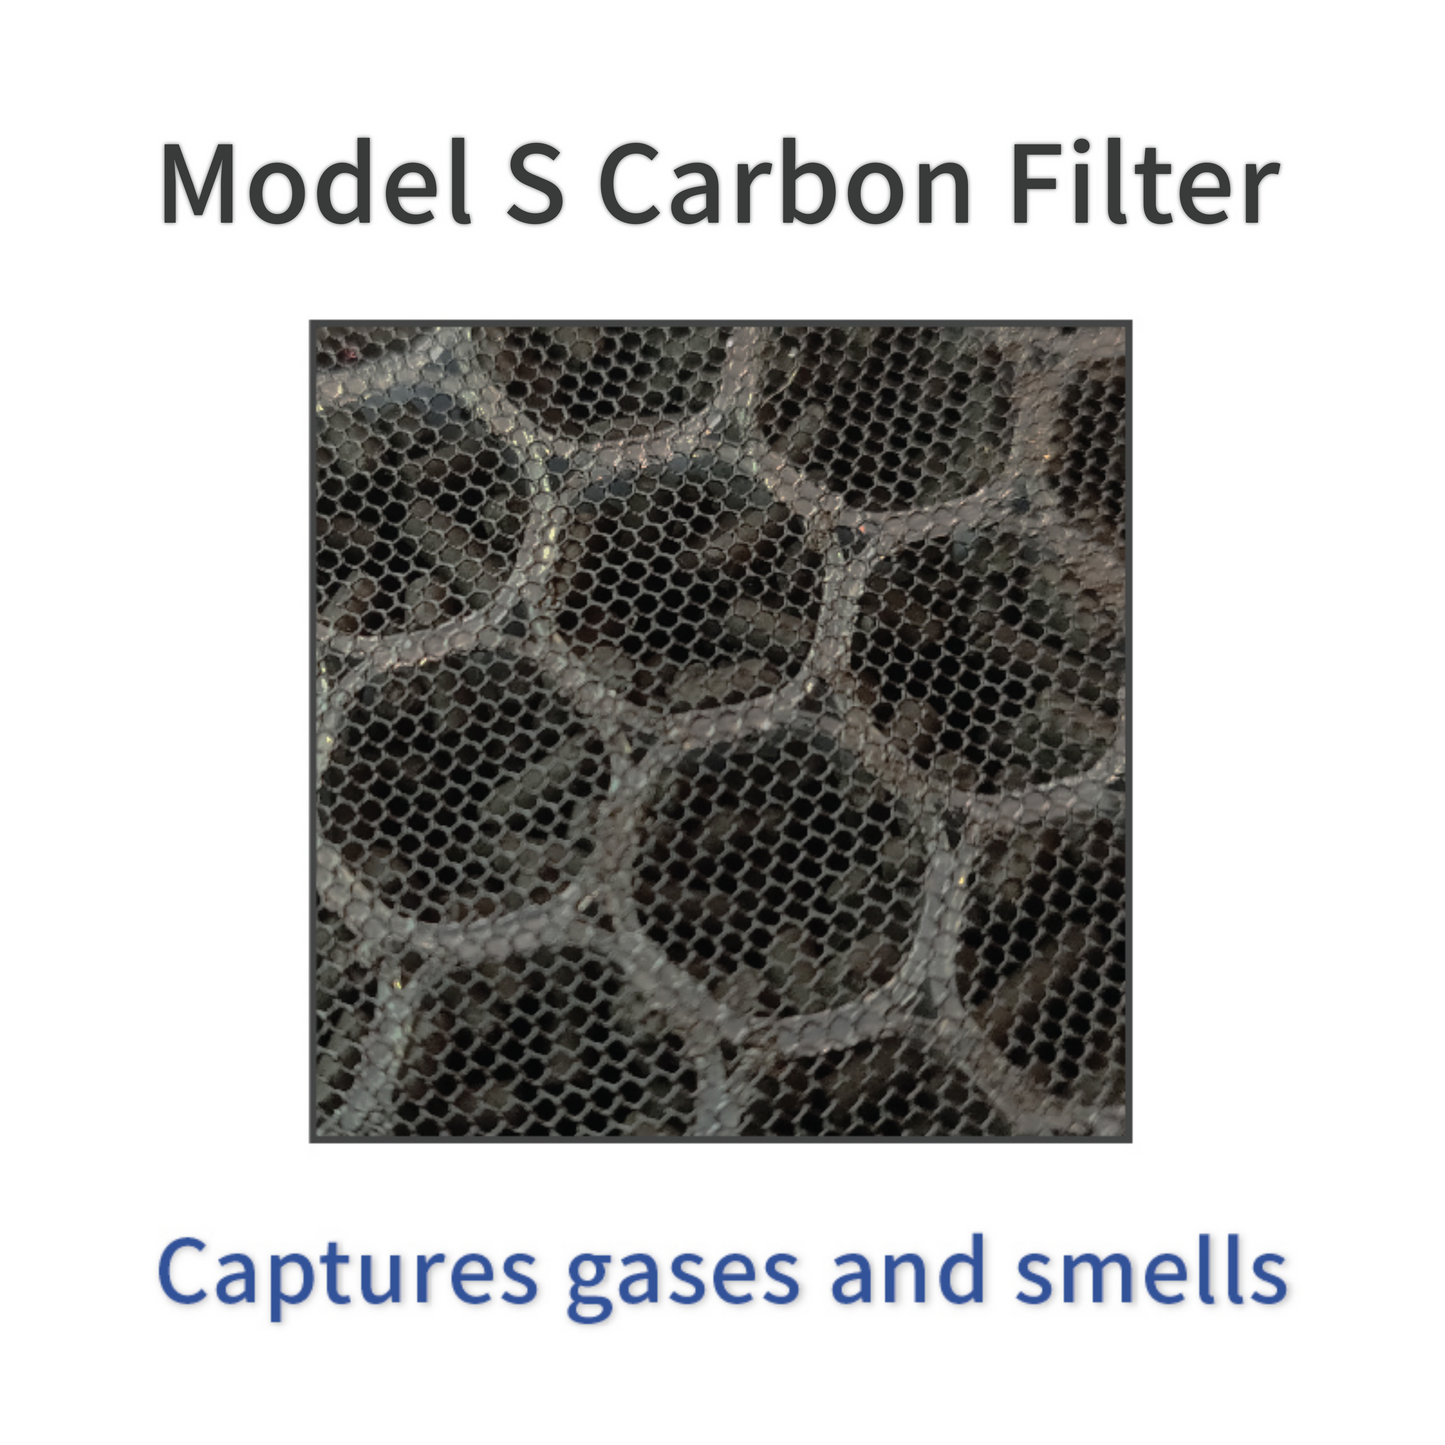 The S Carbon Filter